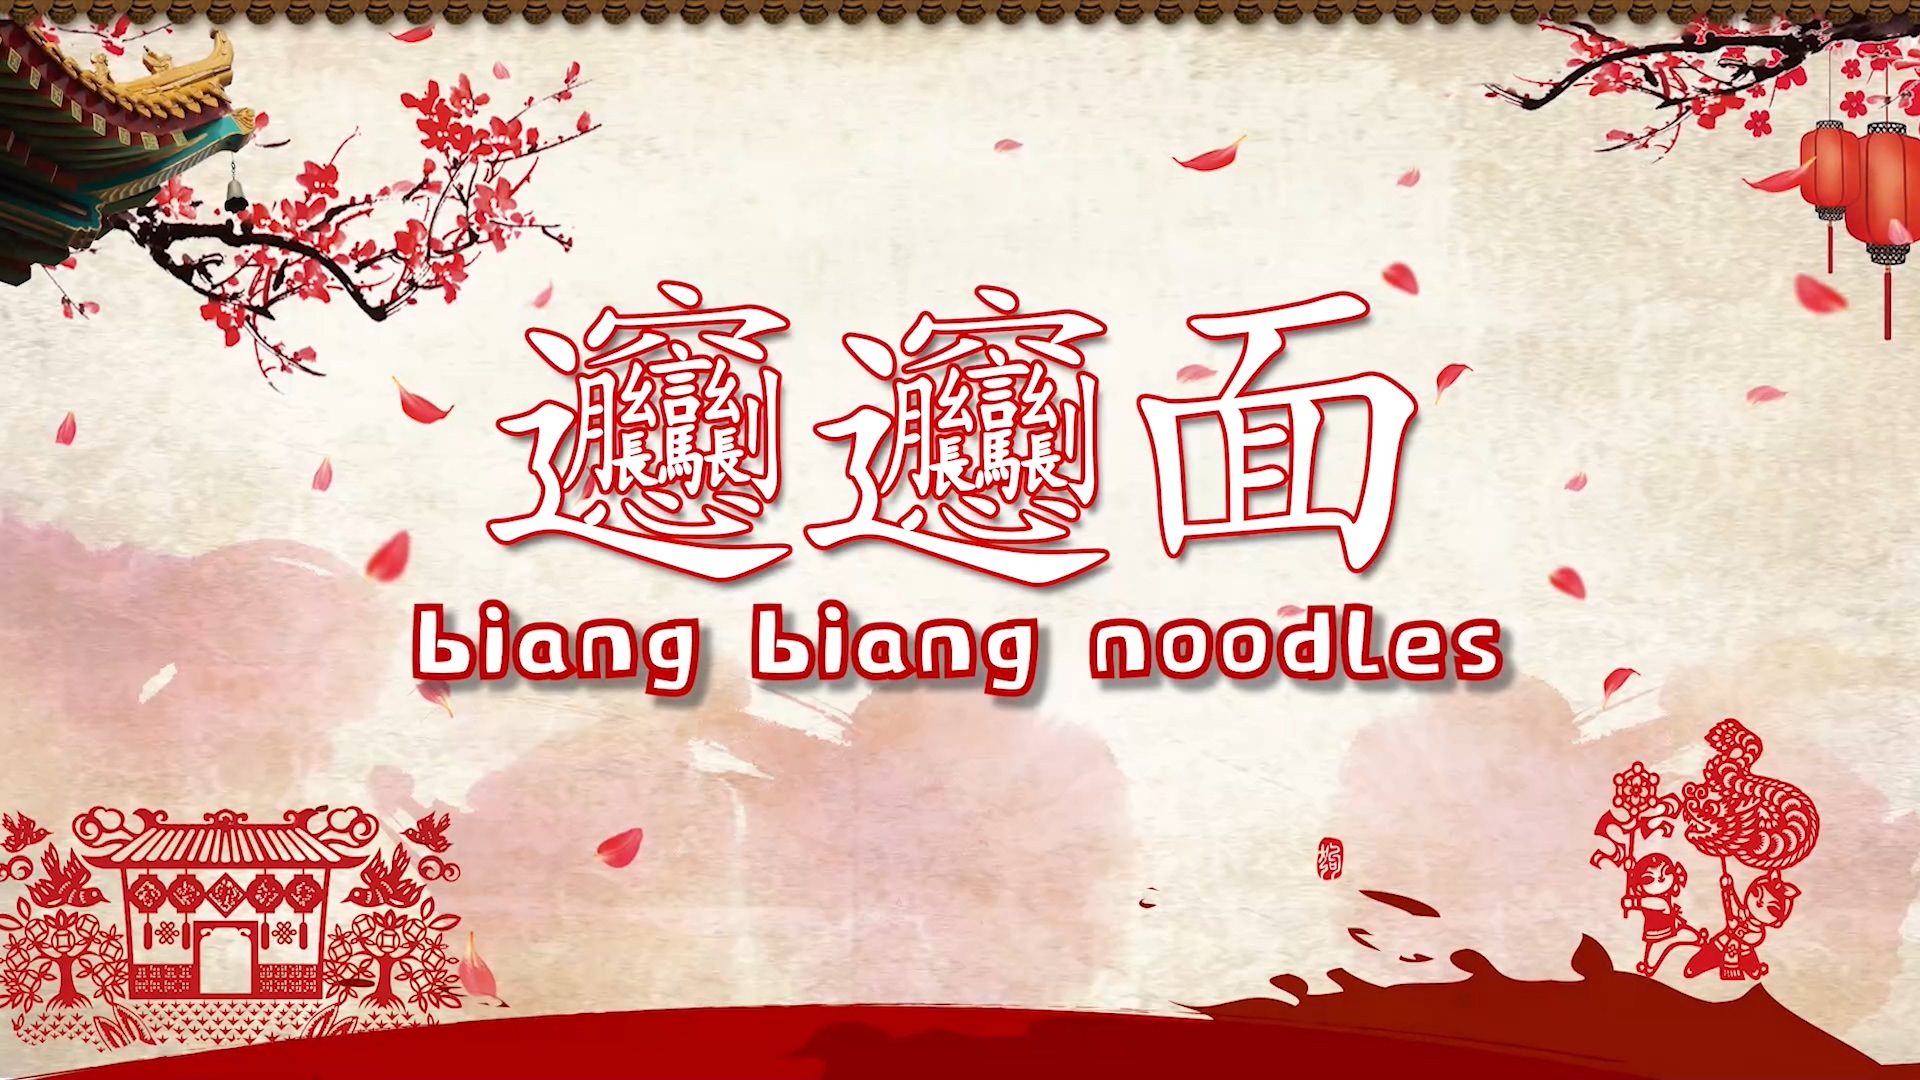 biangbiang noodles